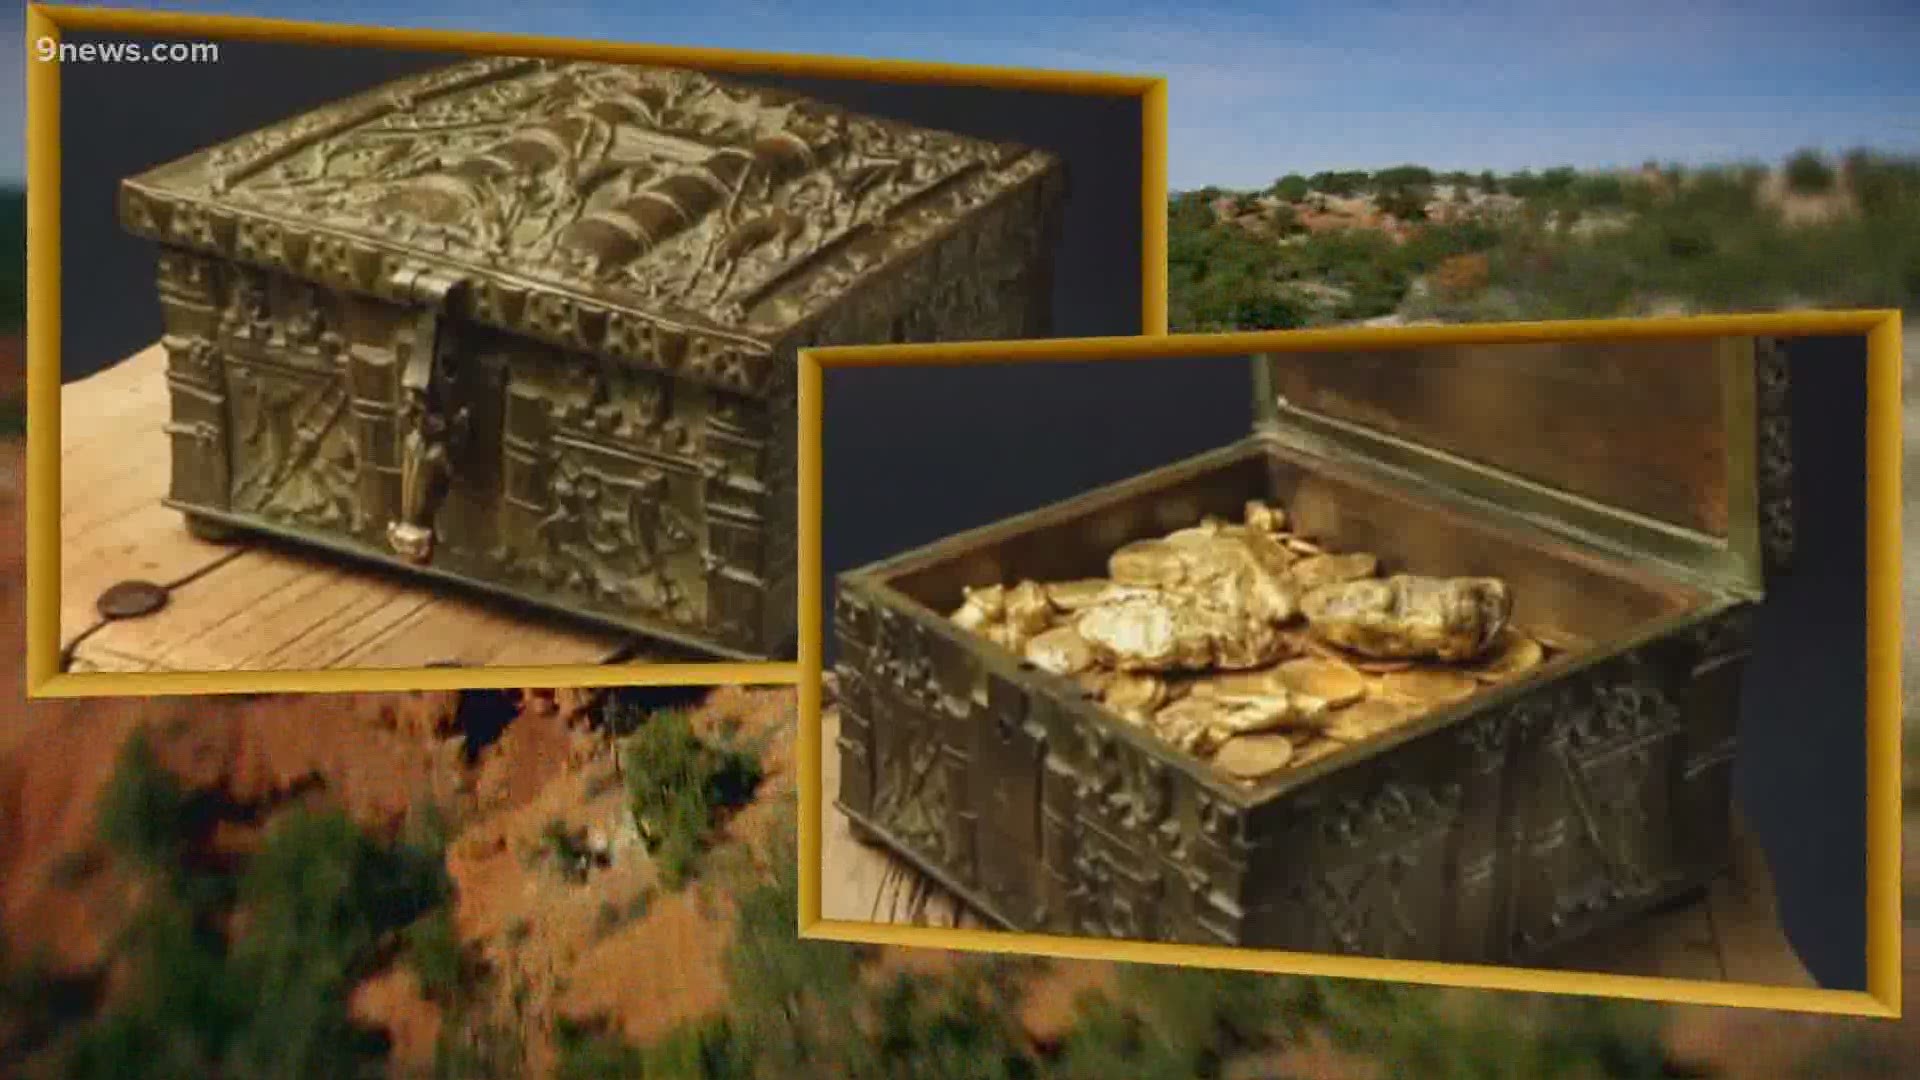 Fenn says he filled a chest with gold, jewels and other valuables worth an estimated $2 million and hid it a decade ago somewhere in the Rocky Mountain wilderness.